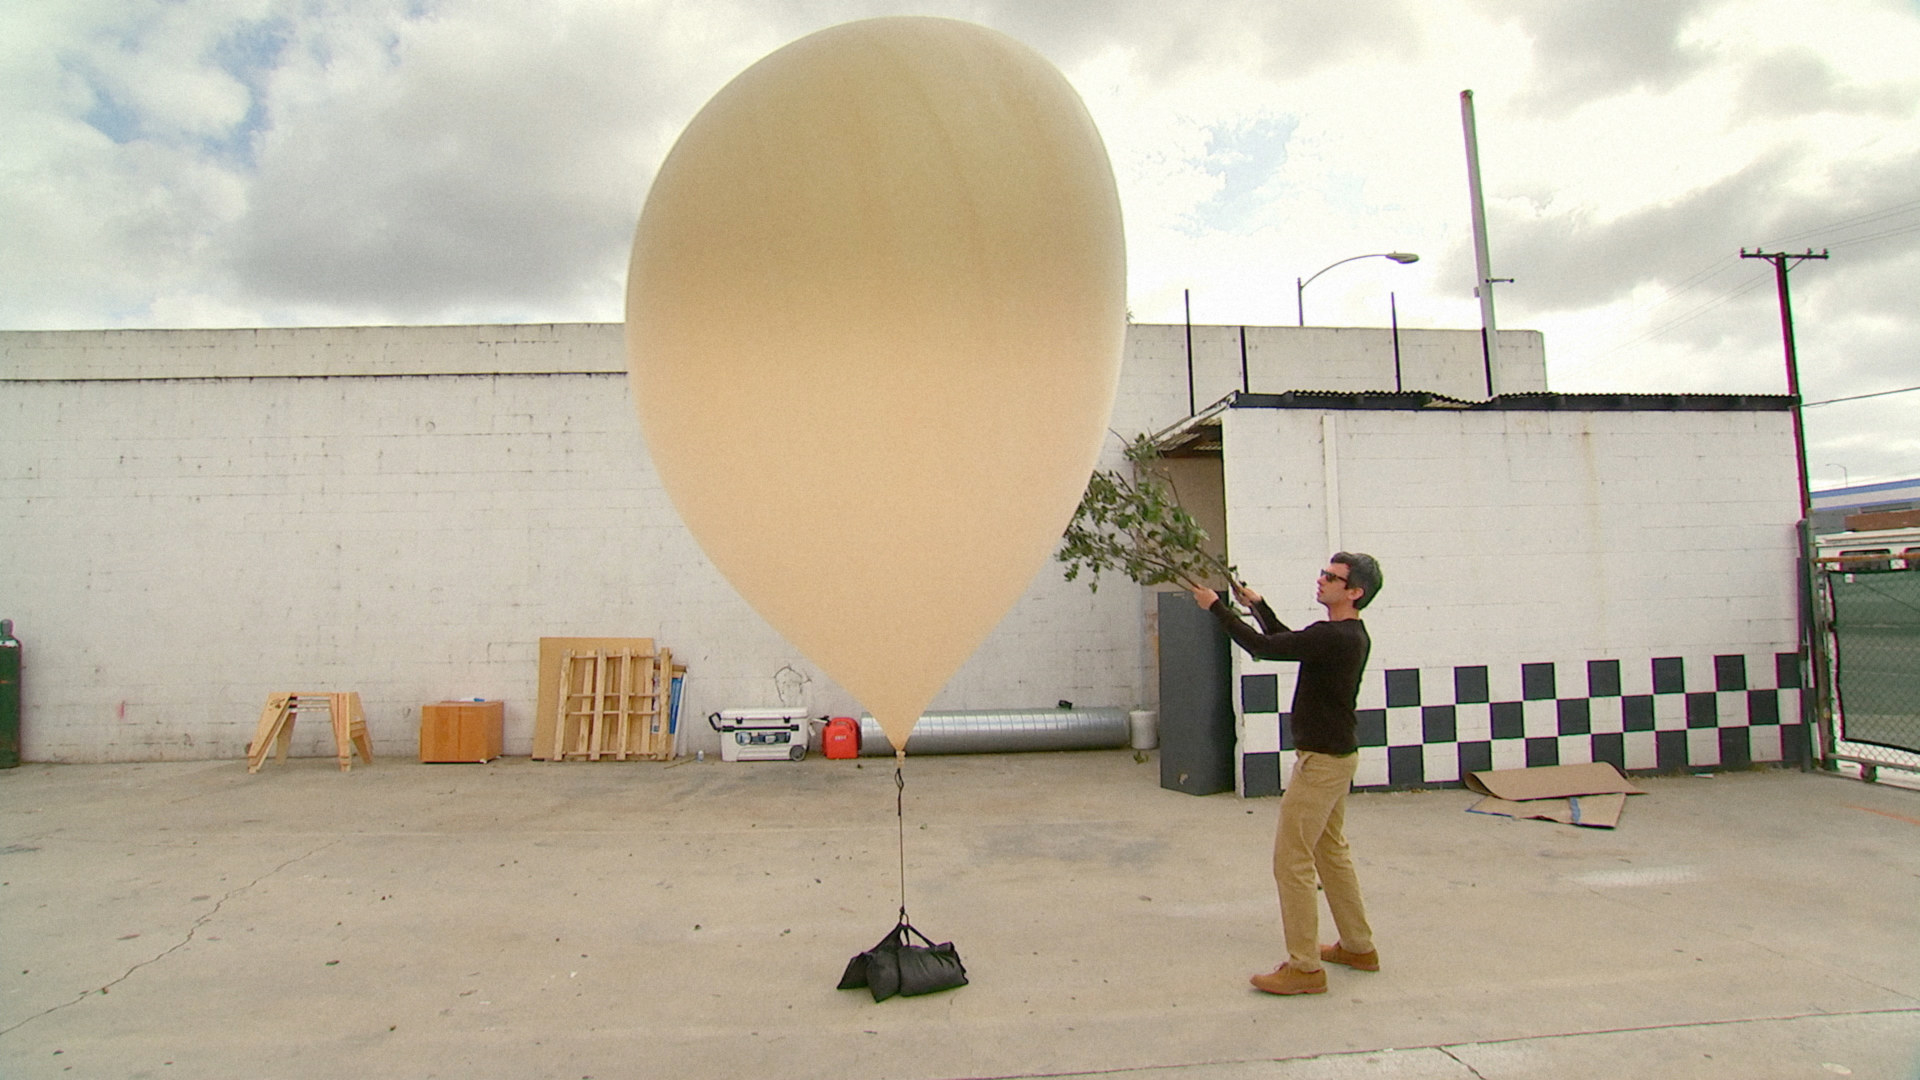 Nathan Field tests the durability of a massive helium balloon with a pair of branches.